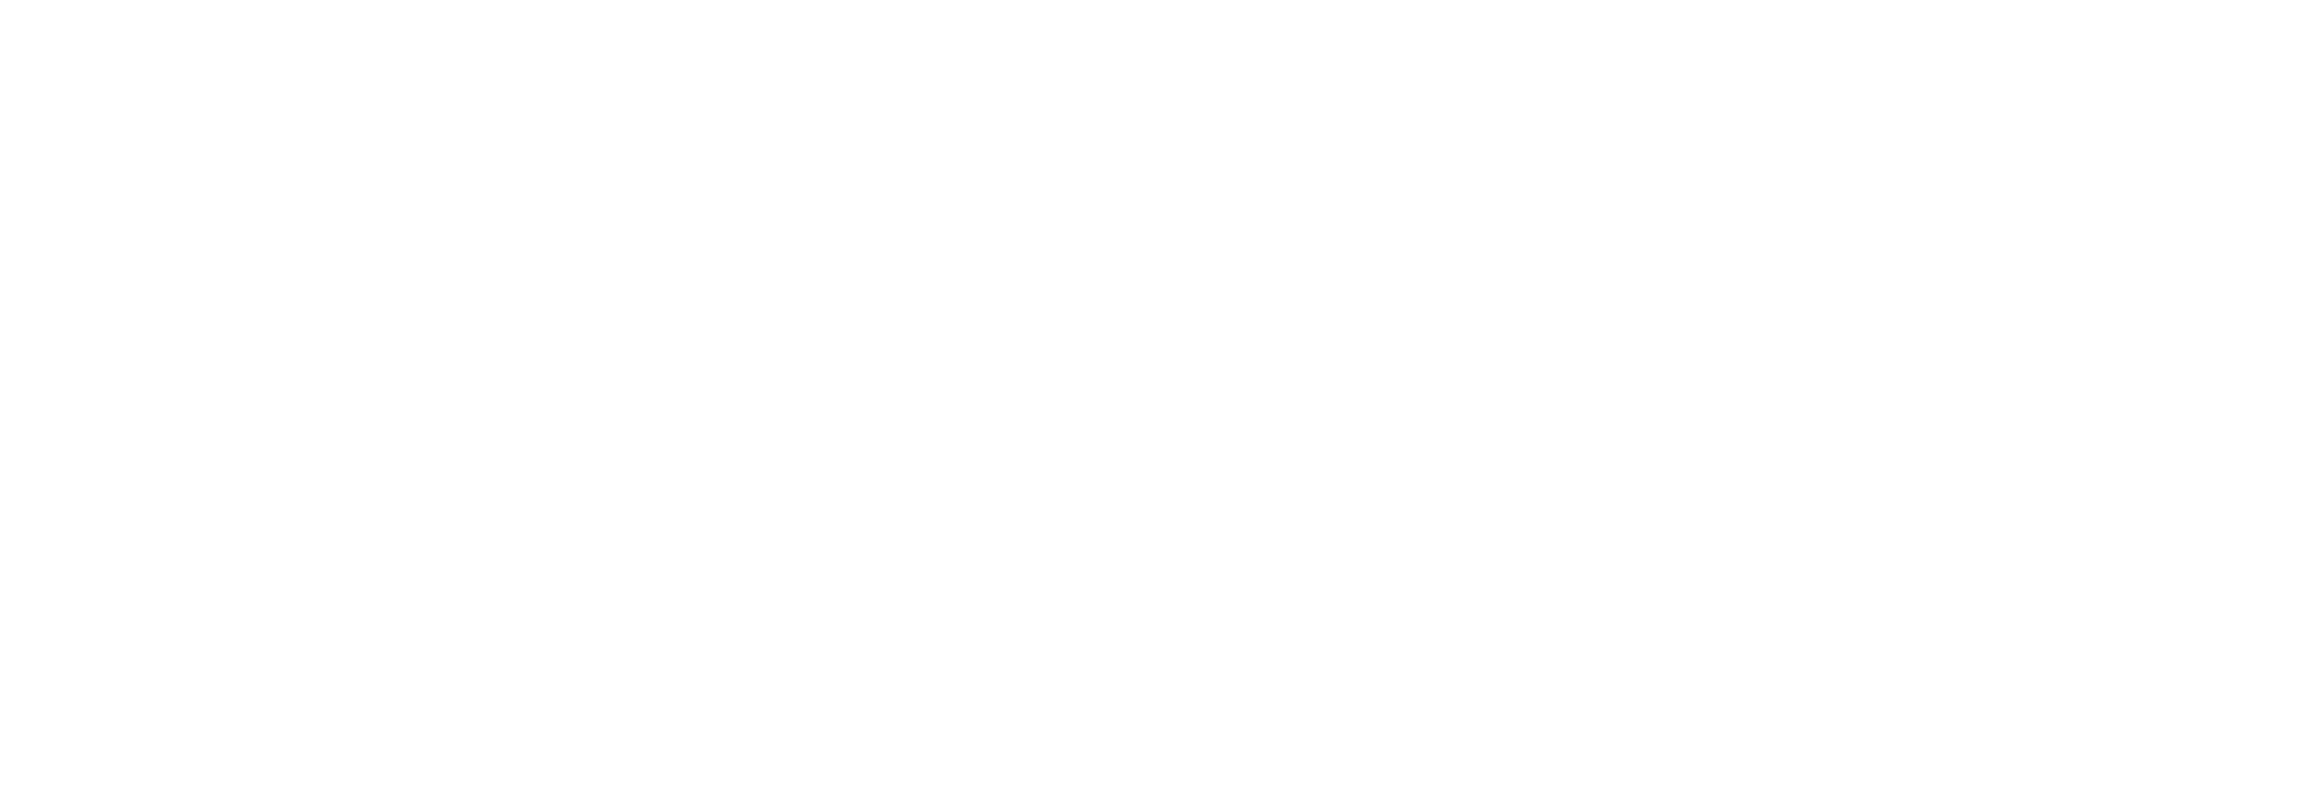 Home inspired memory care & assisted living logo.